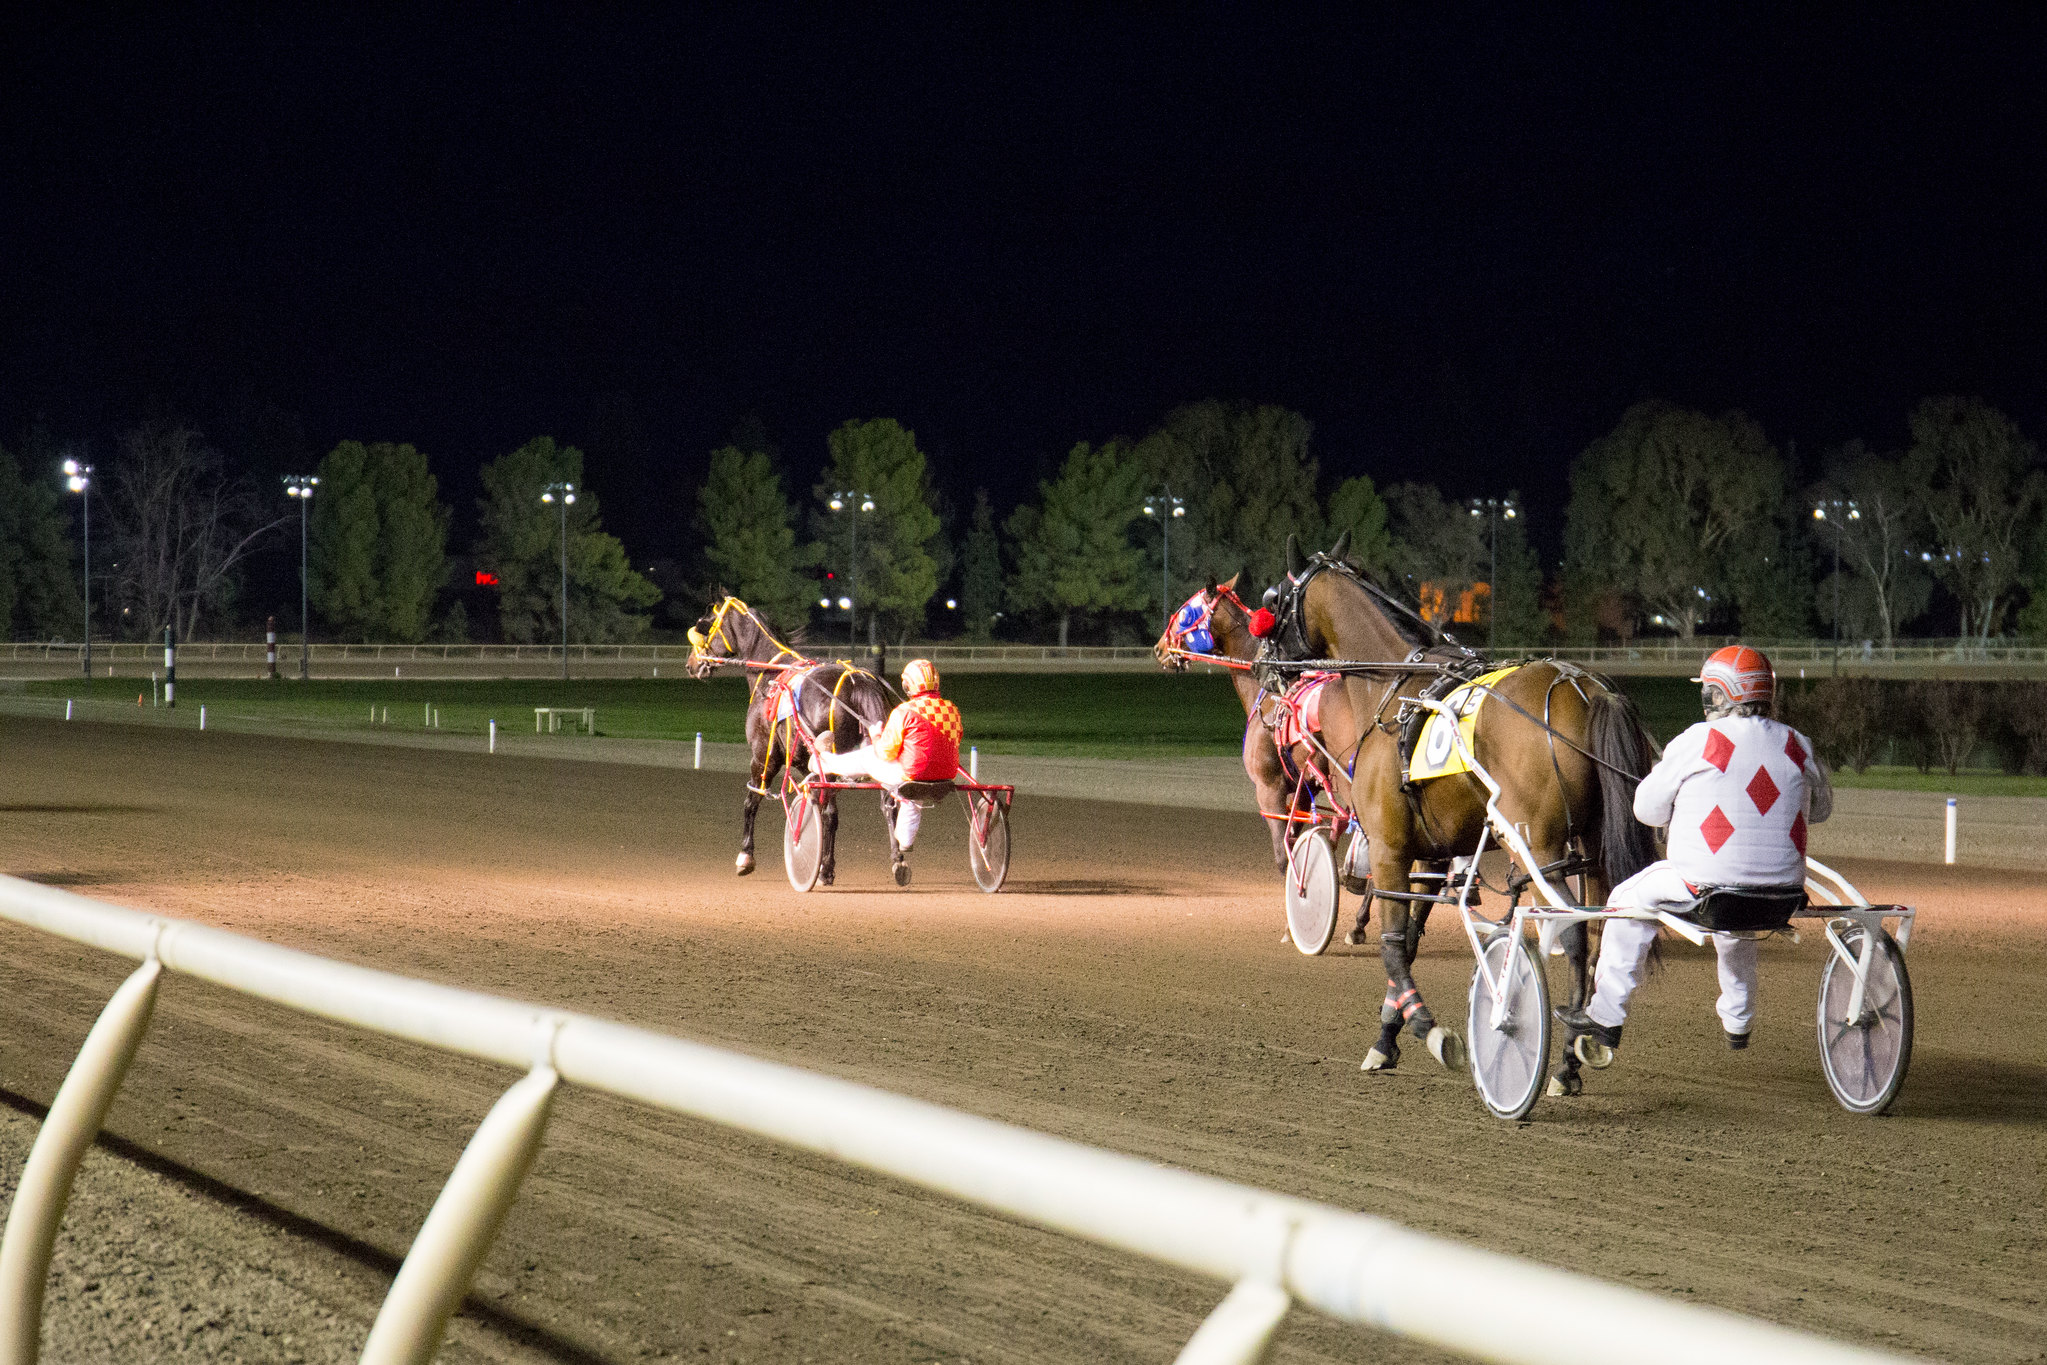 Night time harness racing. Two racers